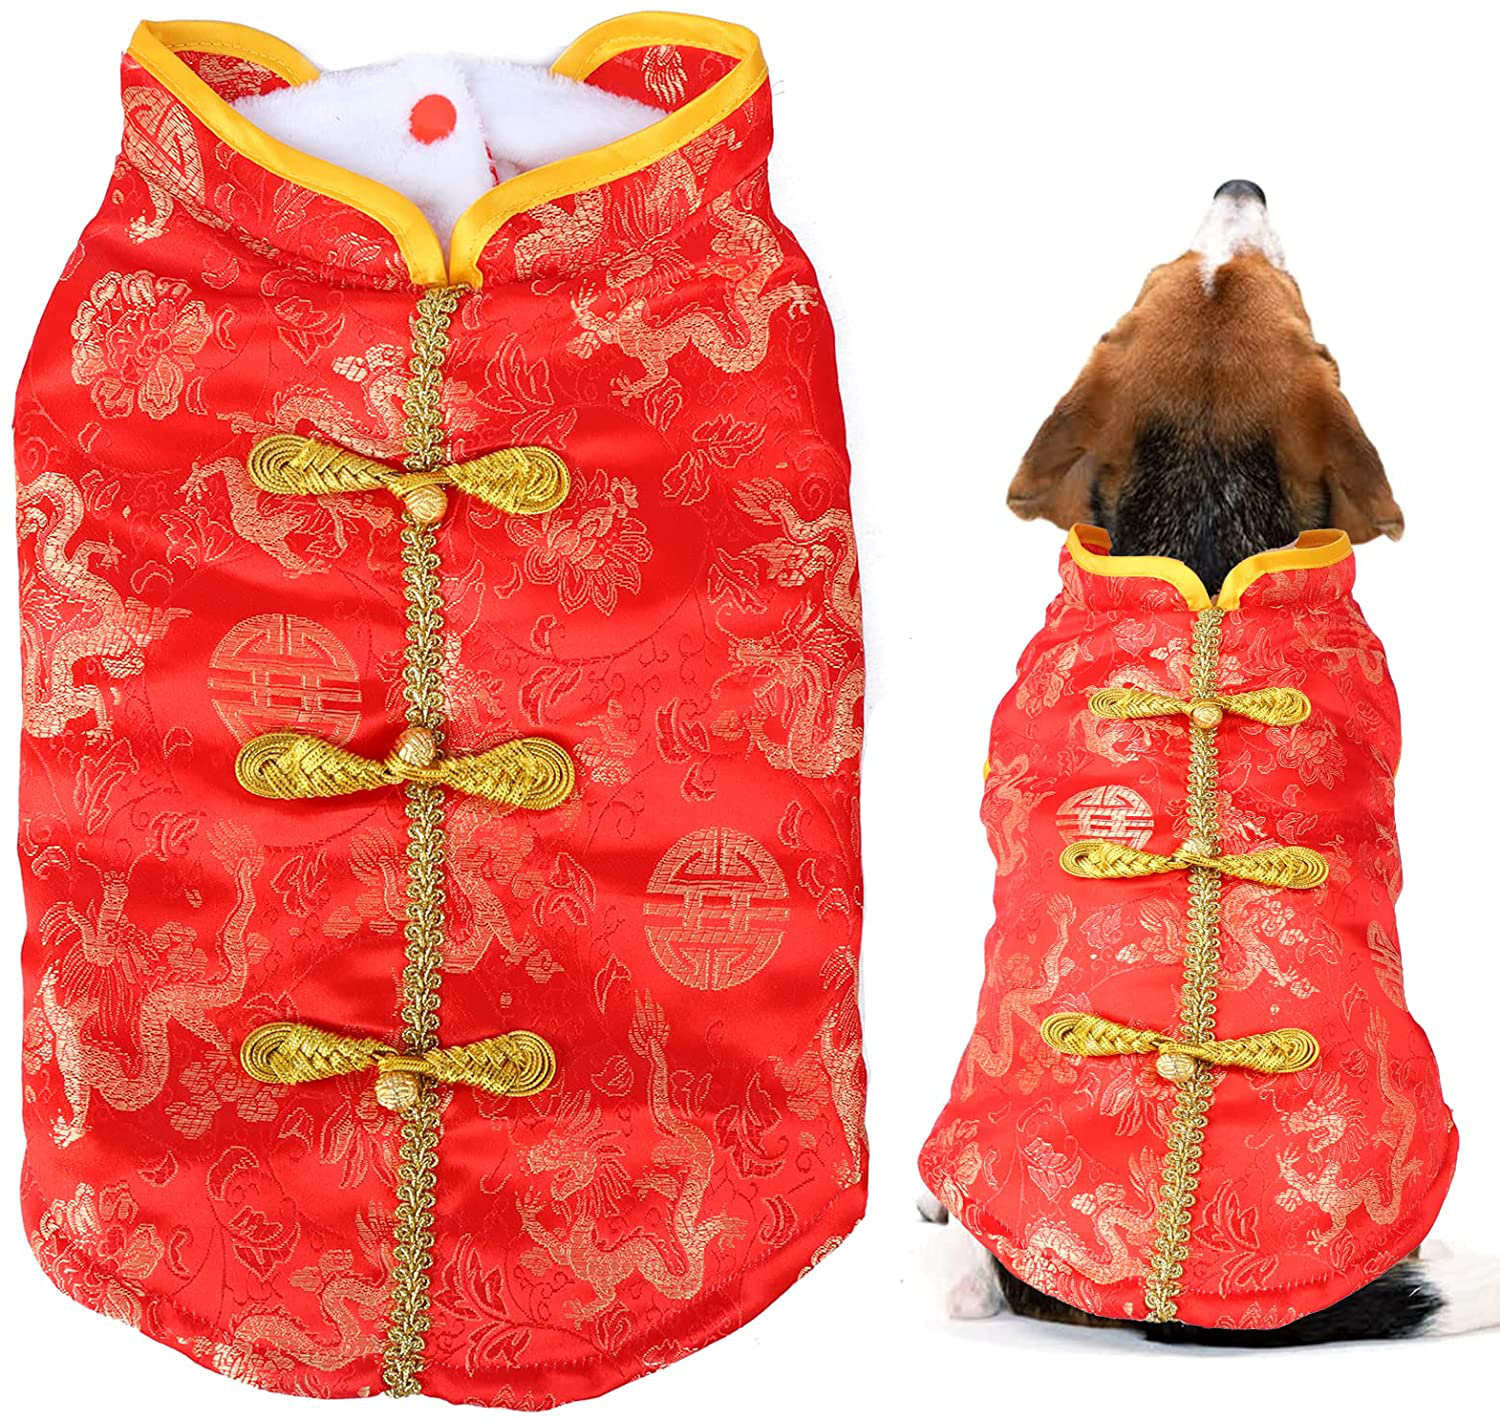 Gyepin New Year Dog Tang Costume Winter Pet Knot Buttons Costume Cheongsam Chinese New Year Pet Clothes Christmas Coat for Teddy Bichon Small Medium Dogs Cats(Size M)